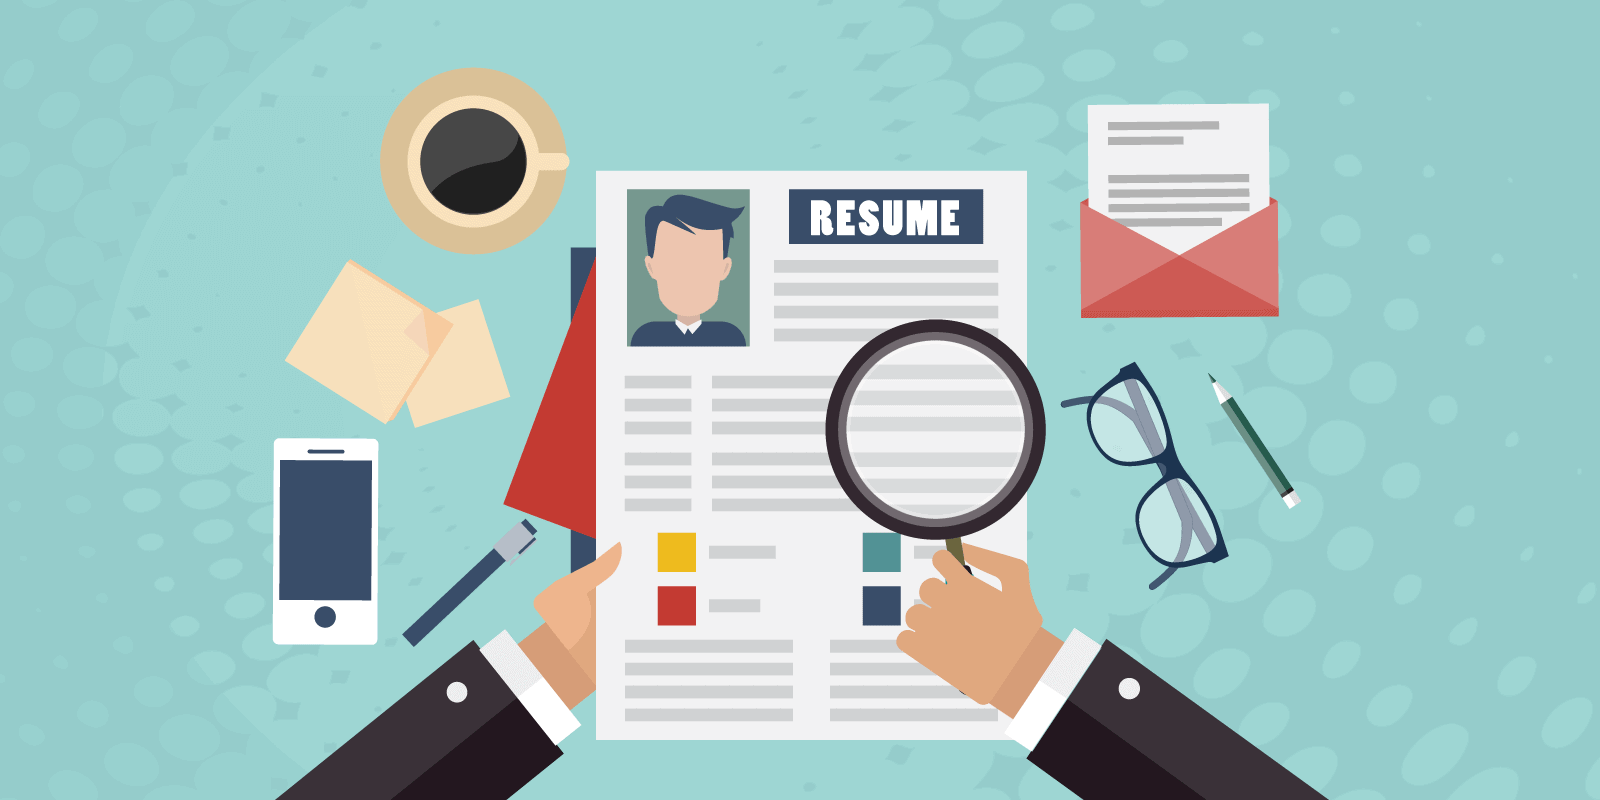 How to Write a Great Cyber Security Resume